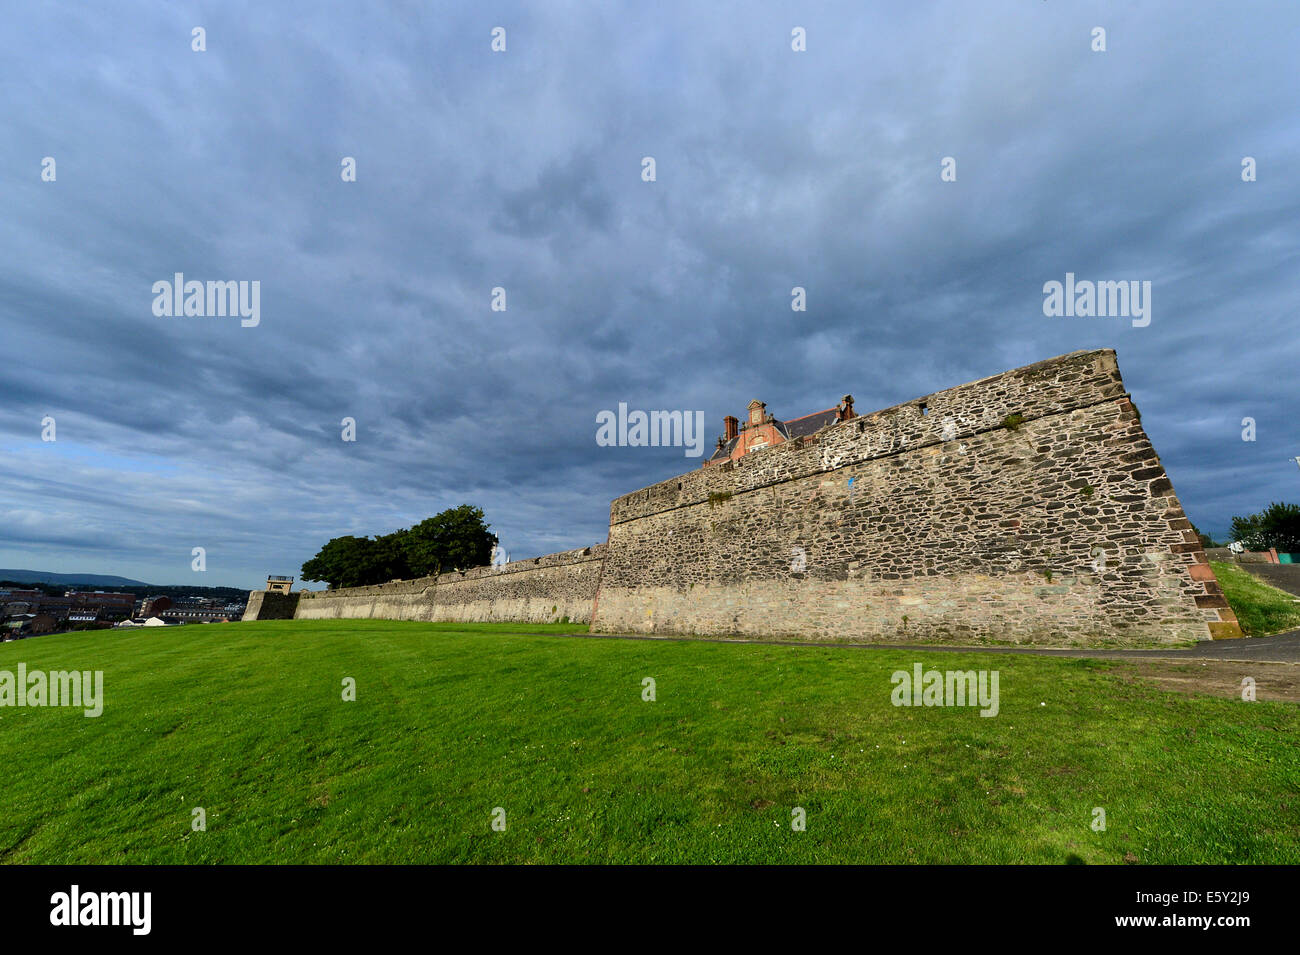 Exterior section of the 17th Century walls of Derry, Londonderry. Stock Photo